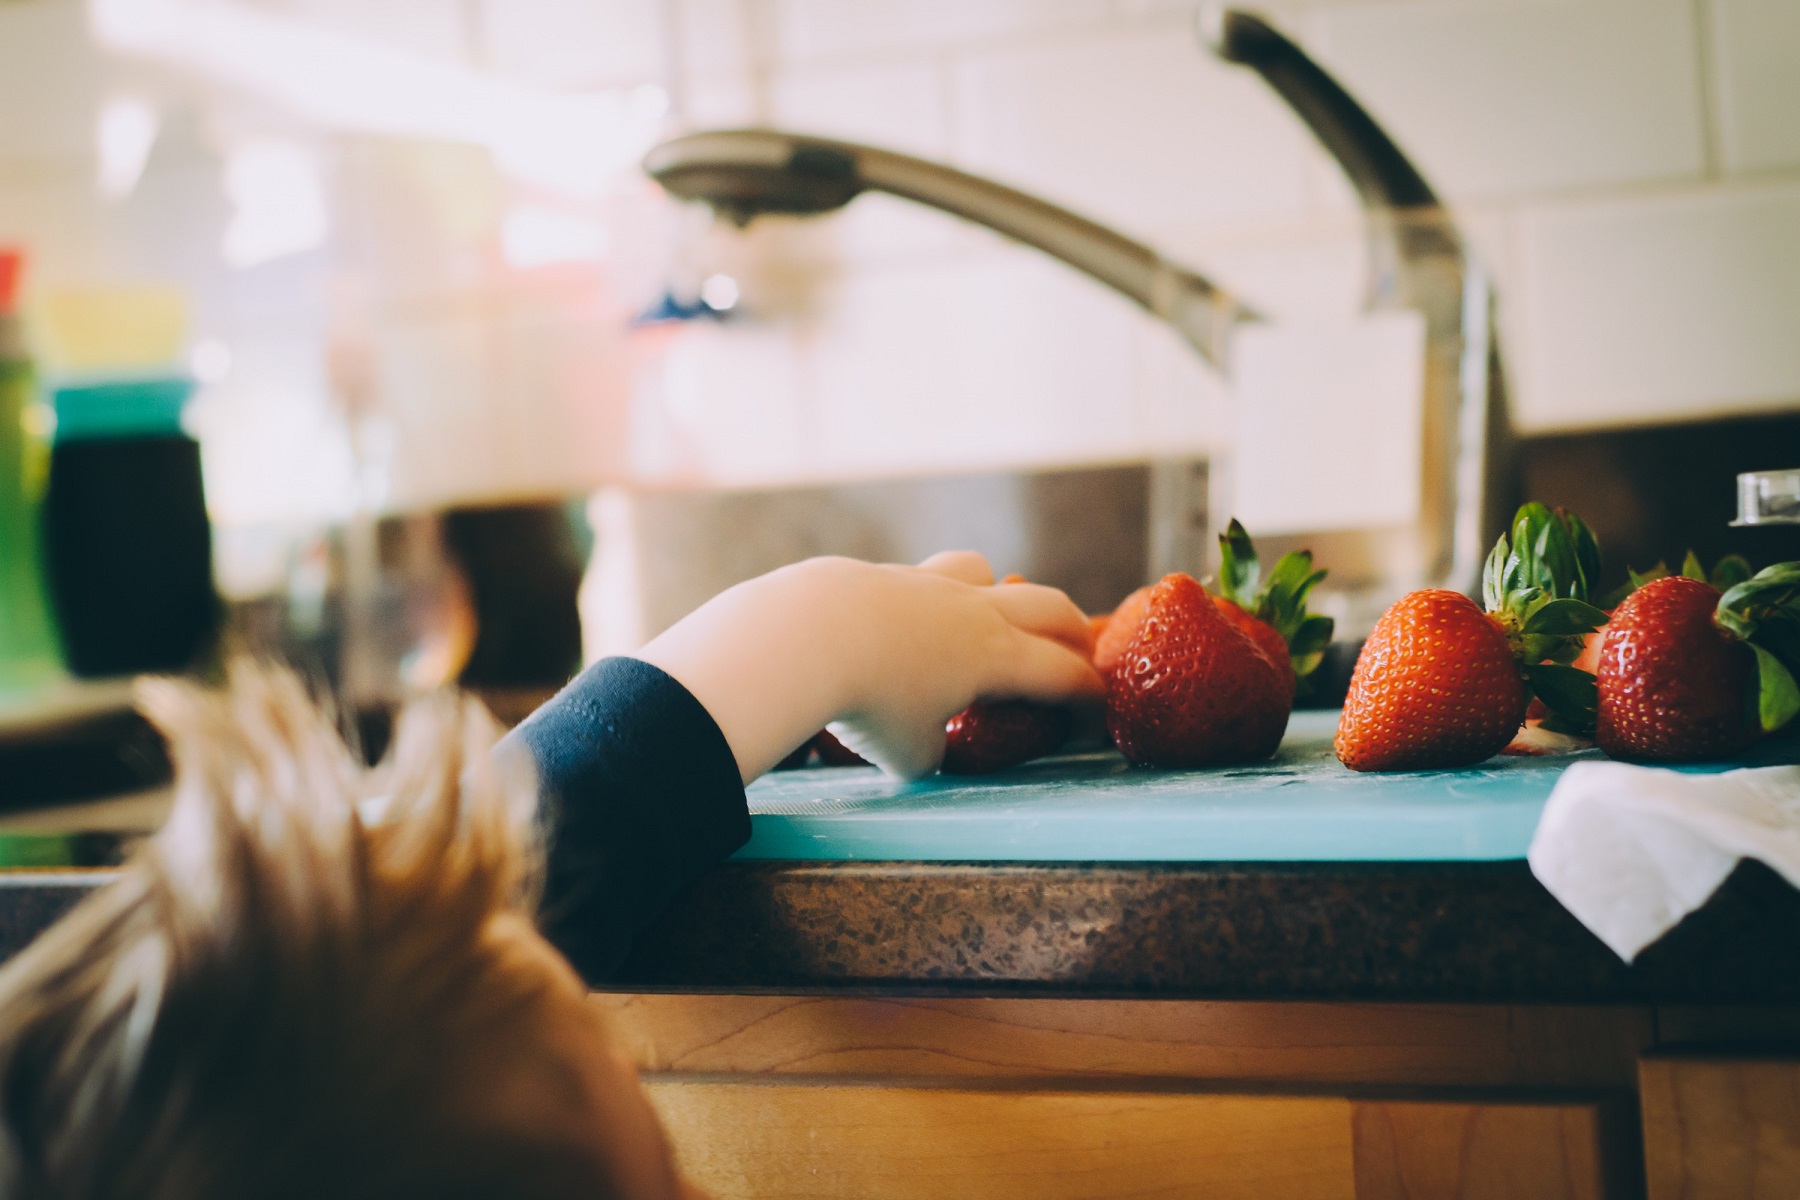 Child reaching up onto the worktop for a piece of fruit. In this guide we discuss how to cook with vegan children.